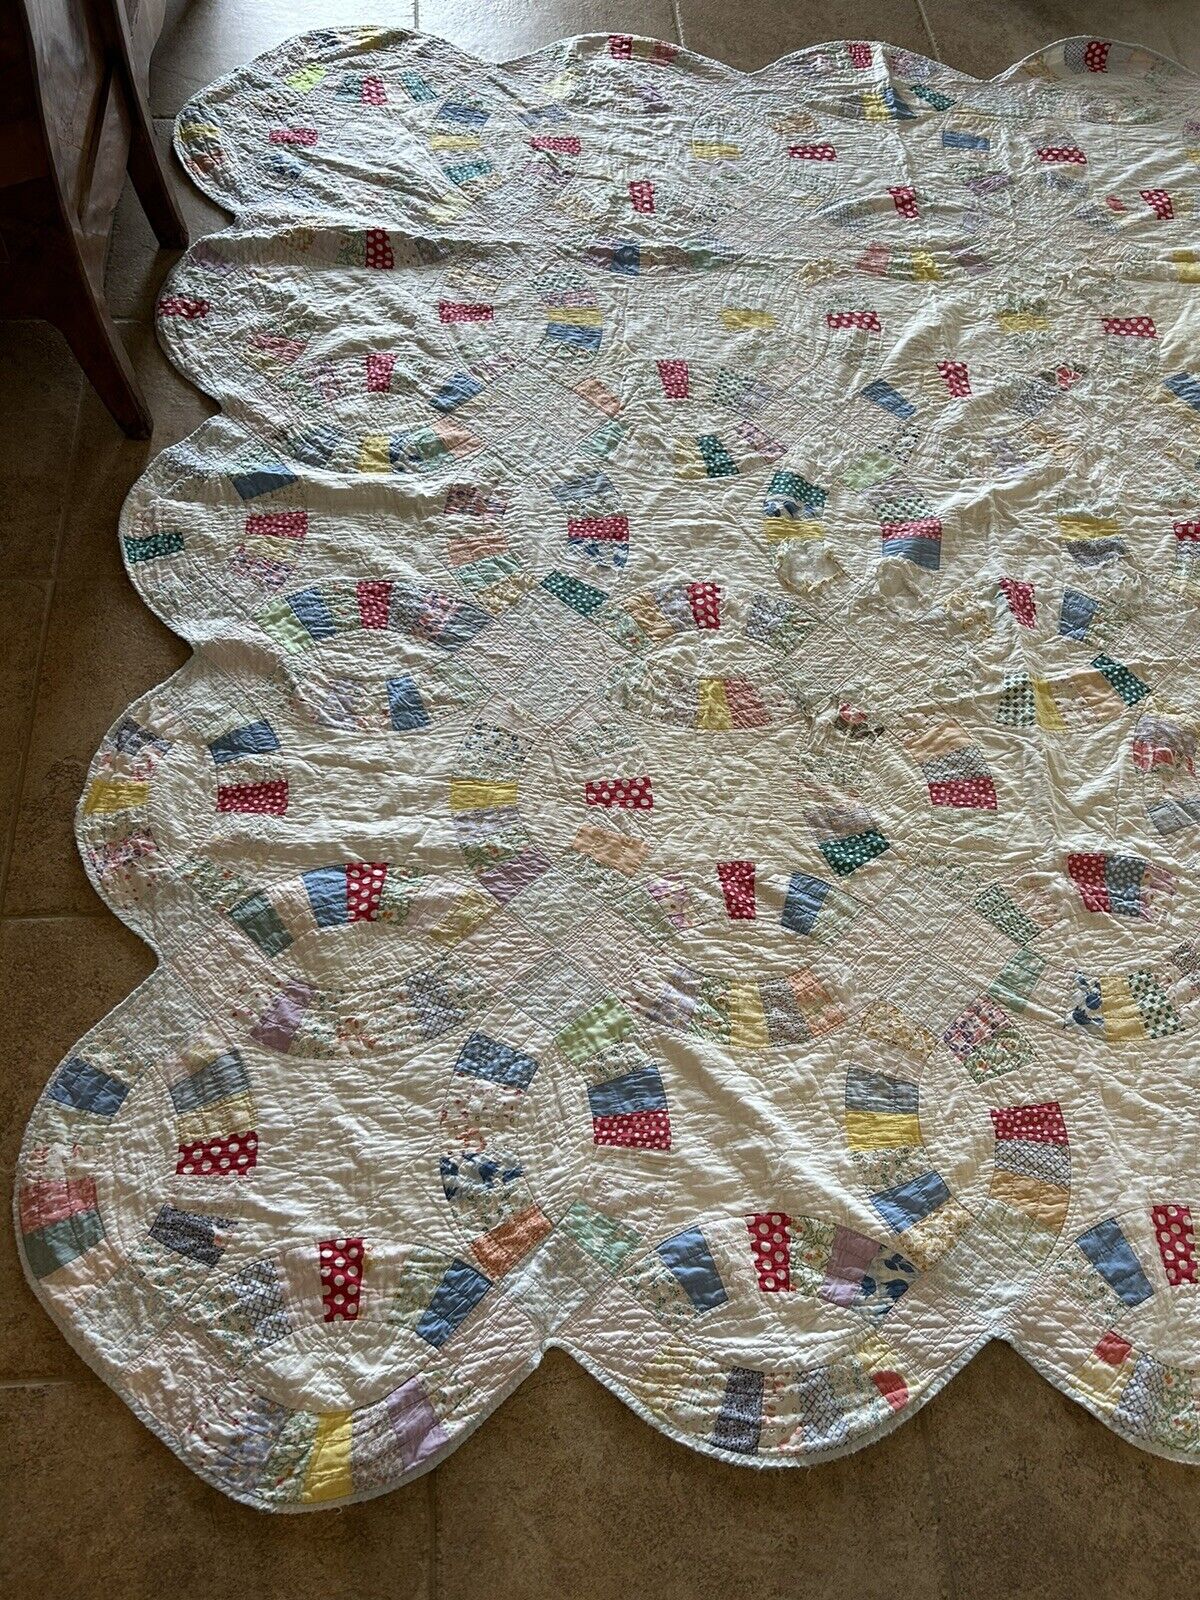 Antique Handmade Double WEDDING RING QUILT Colorful Feedsack Prints 87X91 Damage